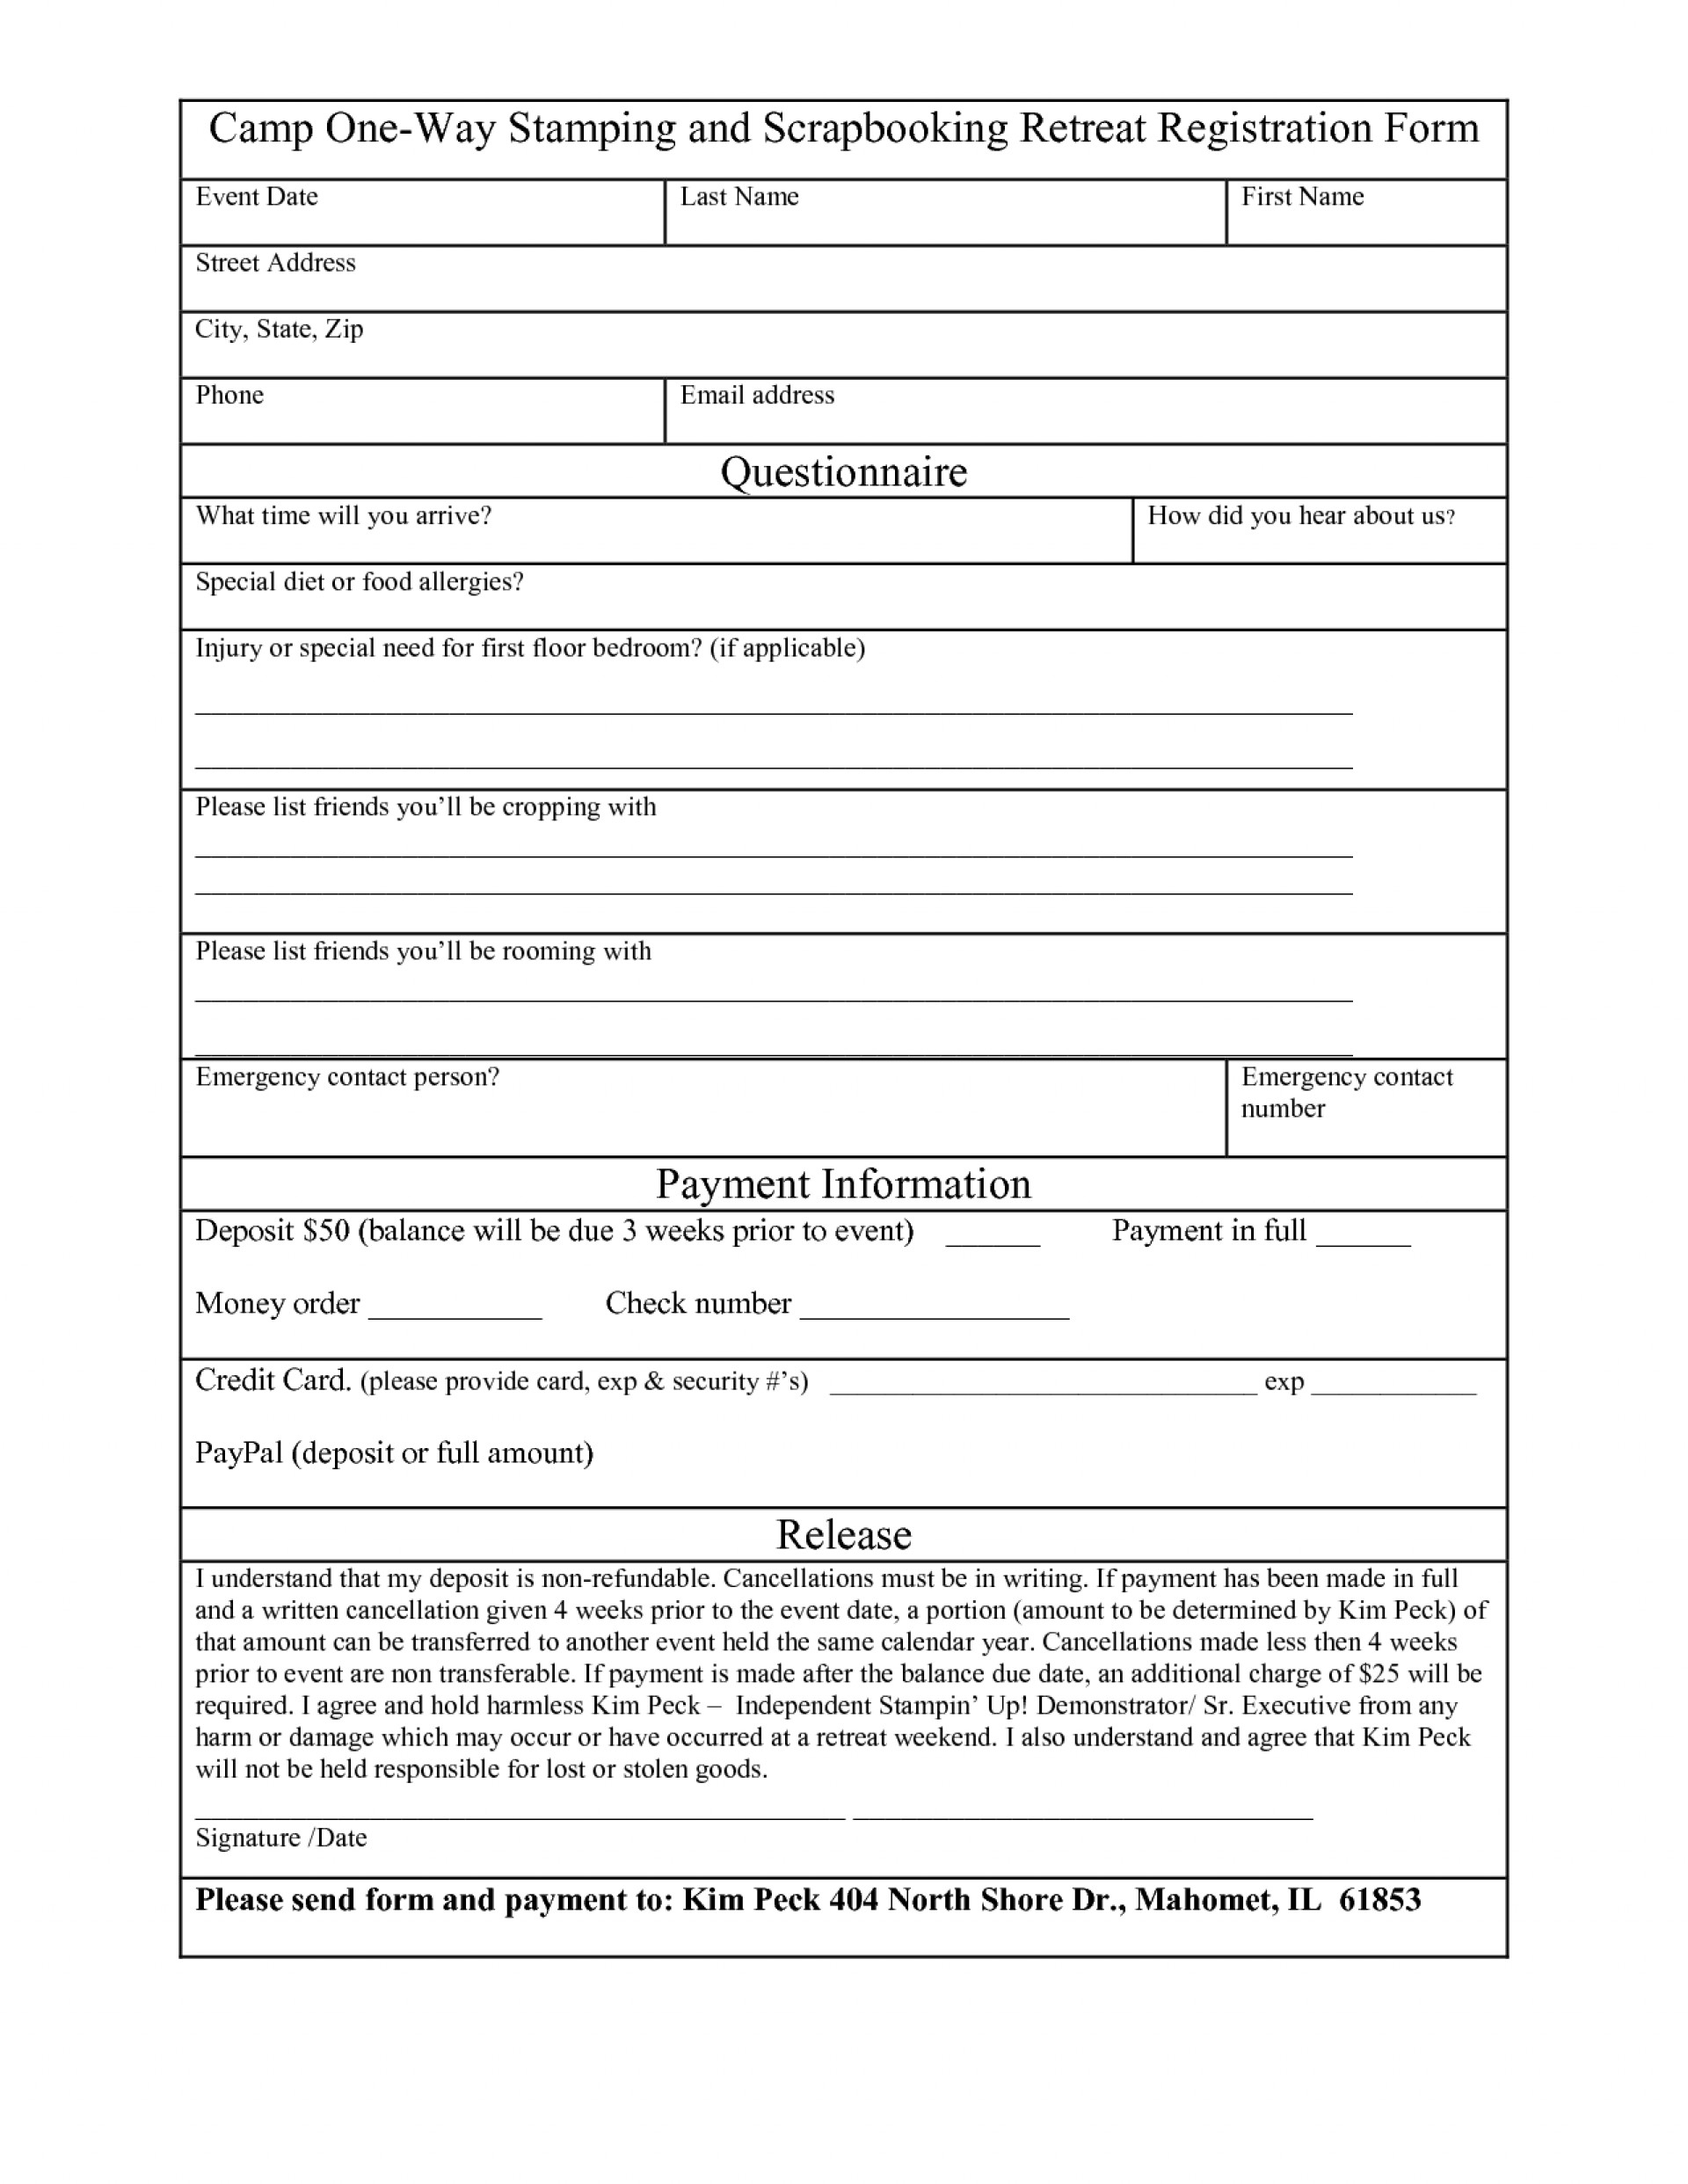 016 School Registration Form Template Word Ideas Free In With Regard To Seminar Registration Form Template Word